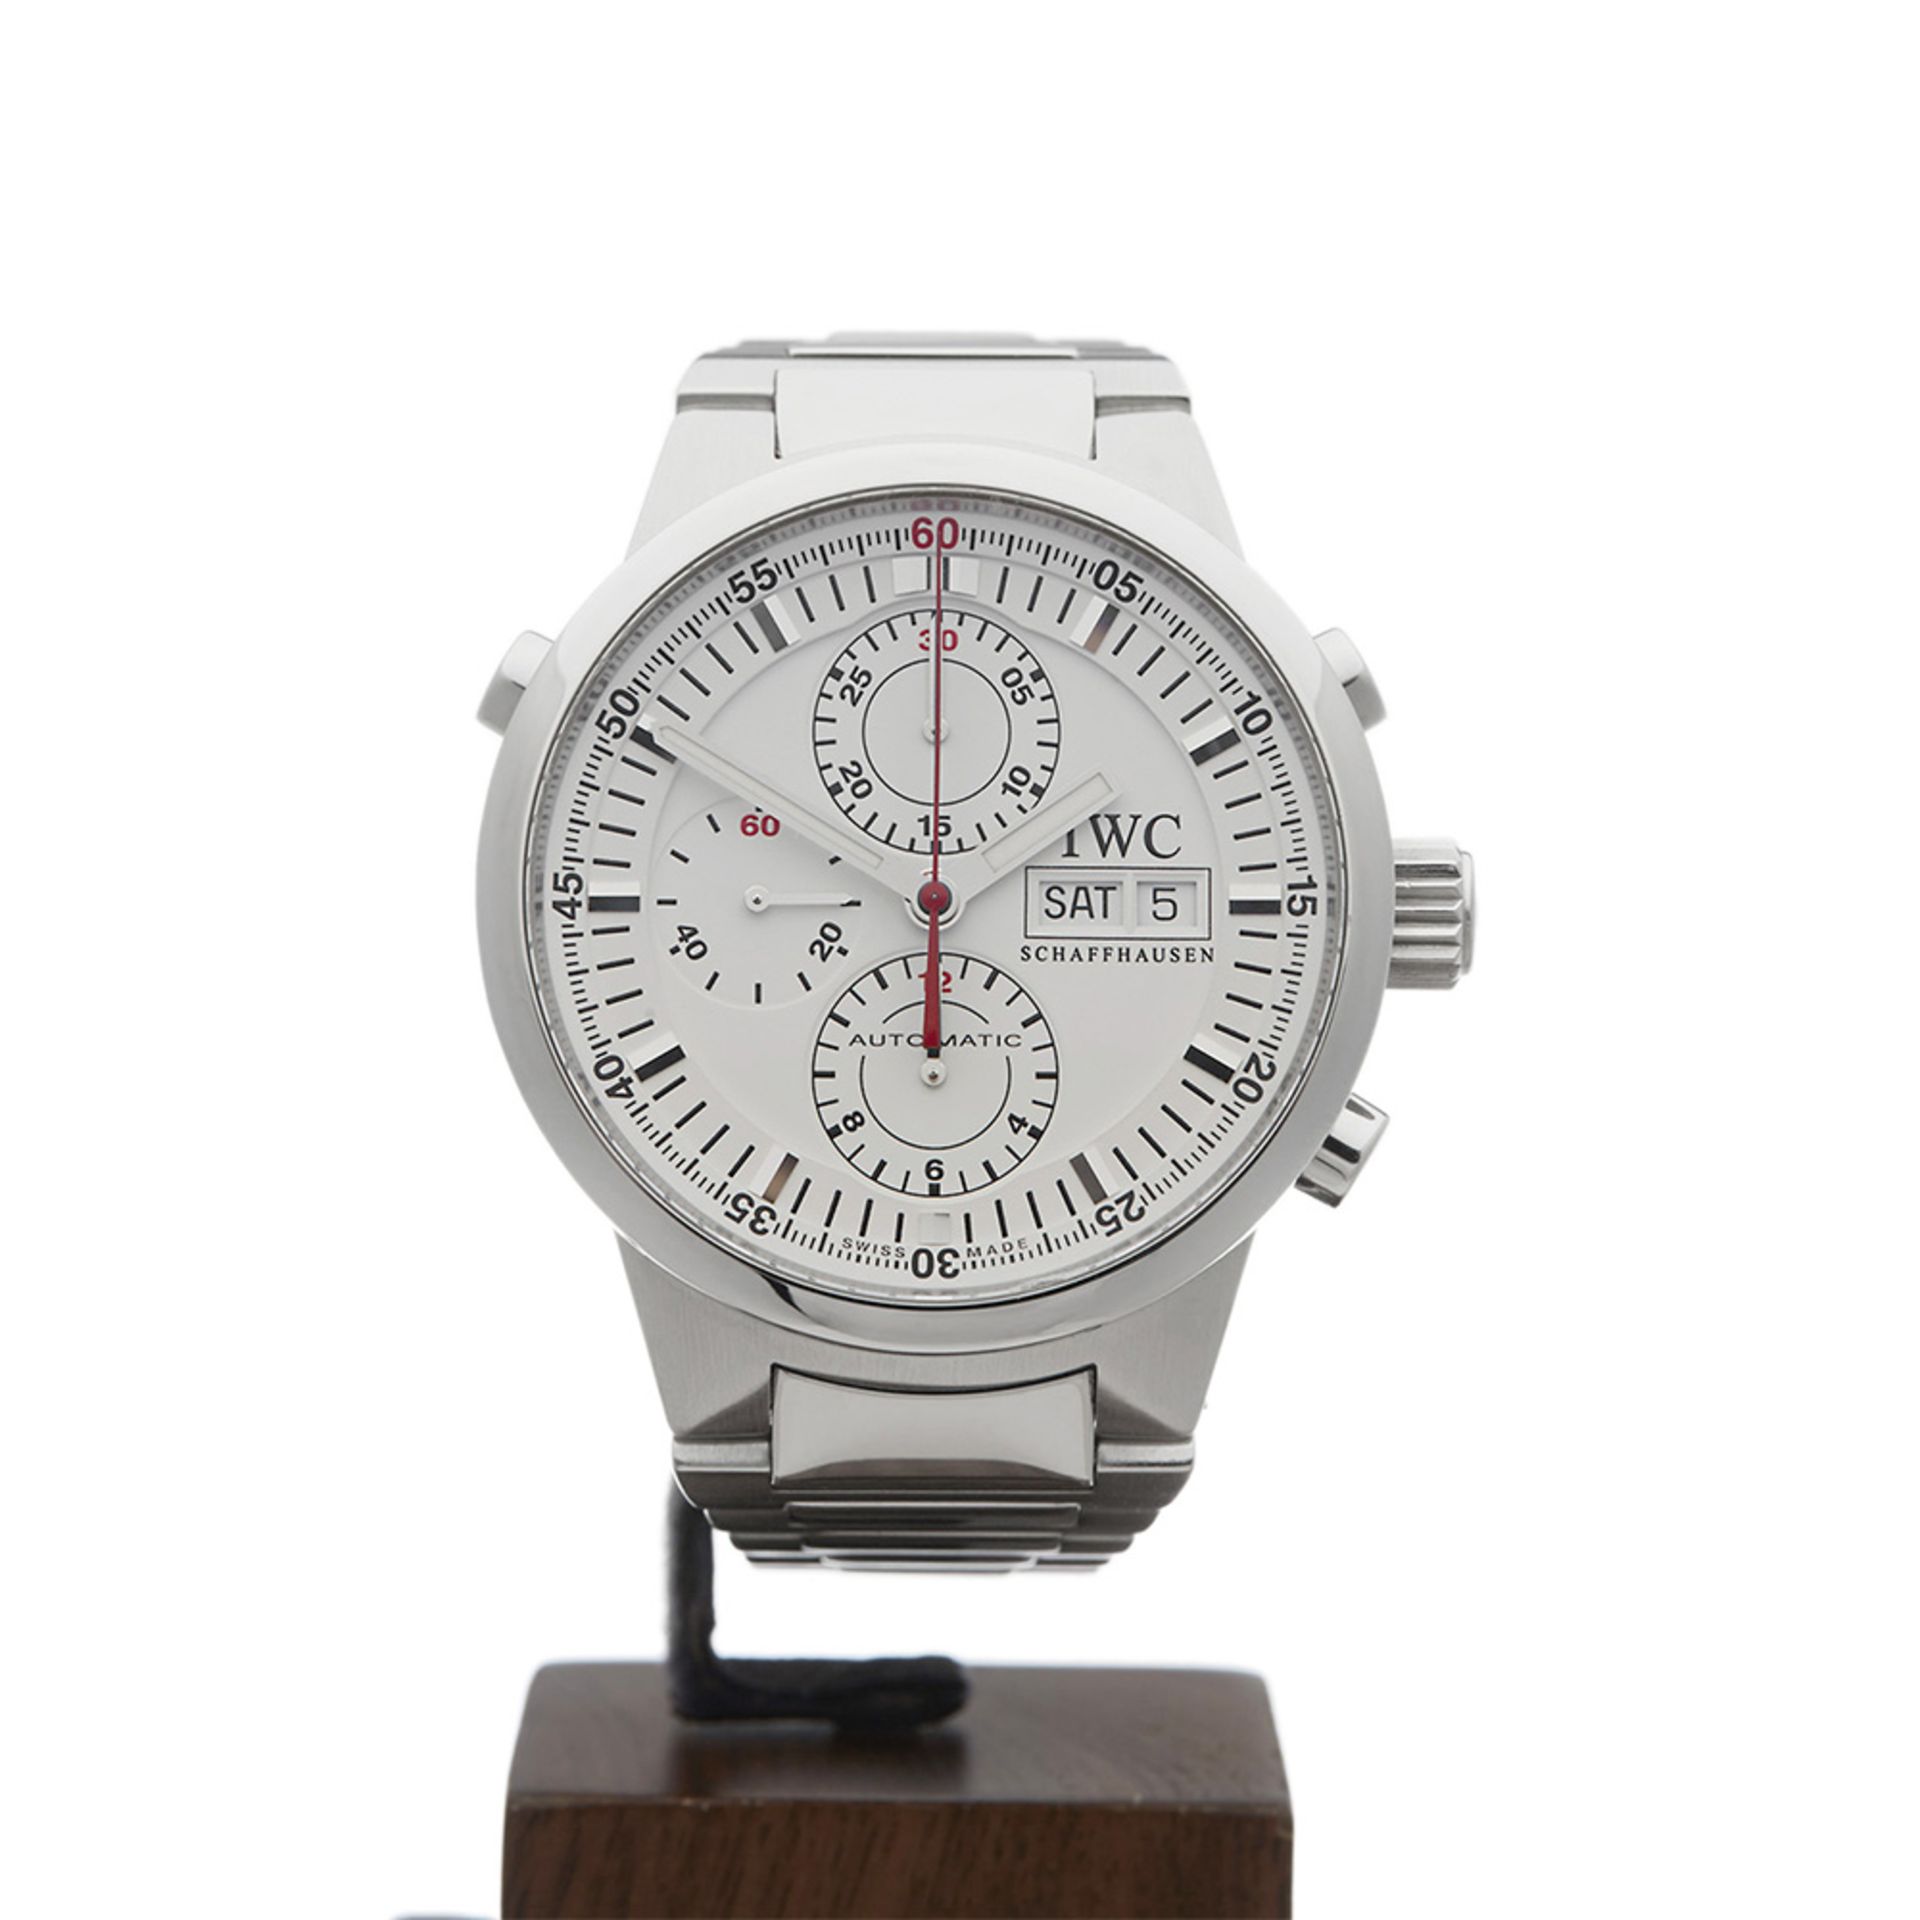 IWC GST Rattrapante Chronograph 43mm Stainless Steel - IW371523 - Image 2 of 9